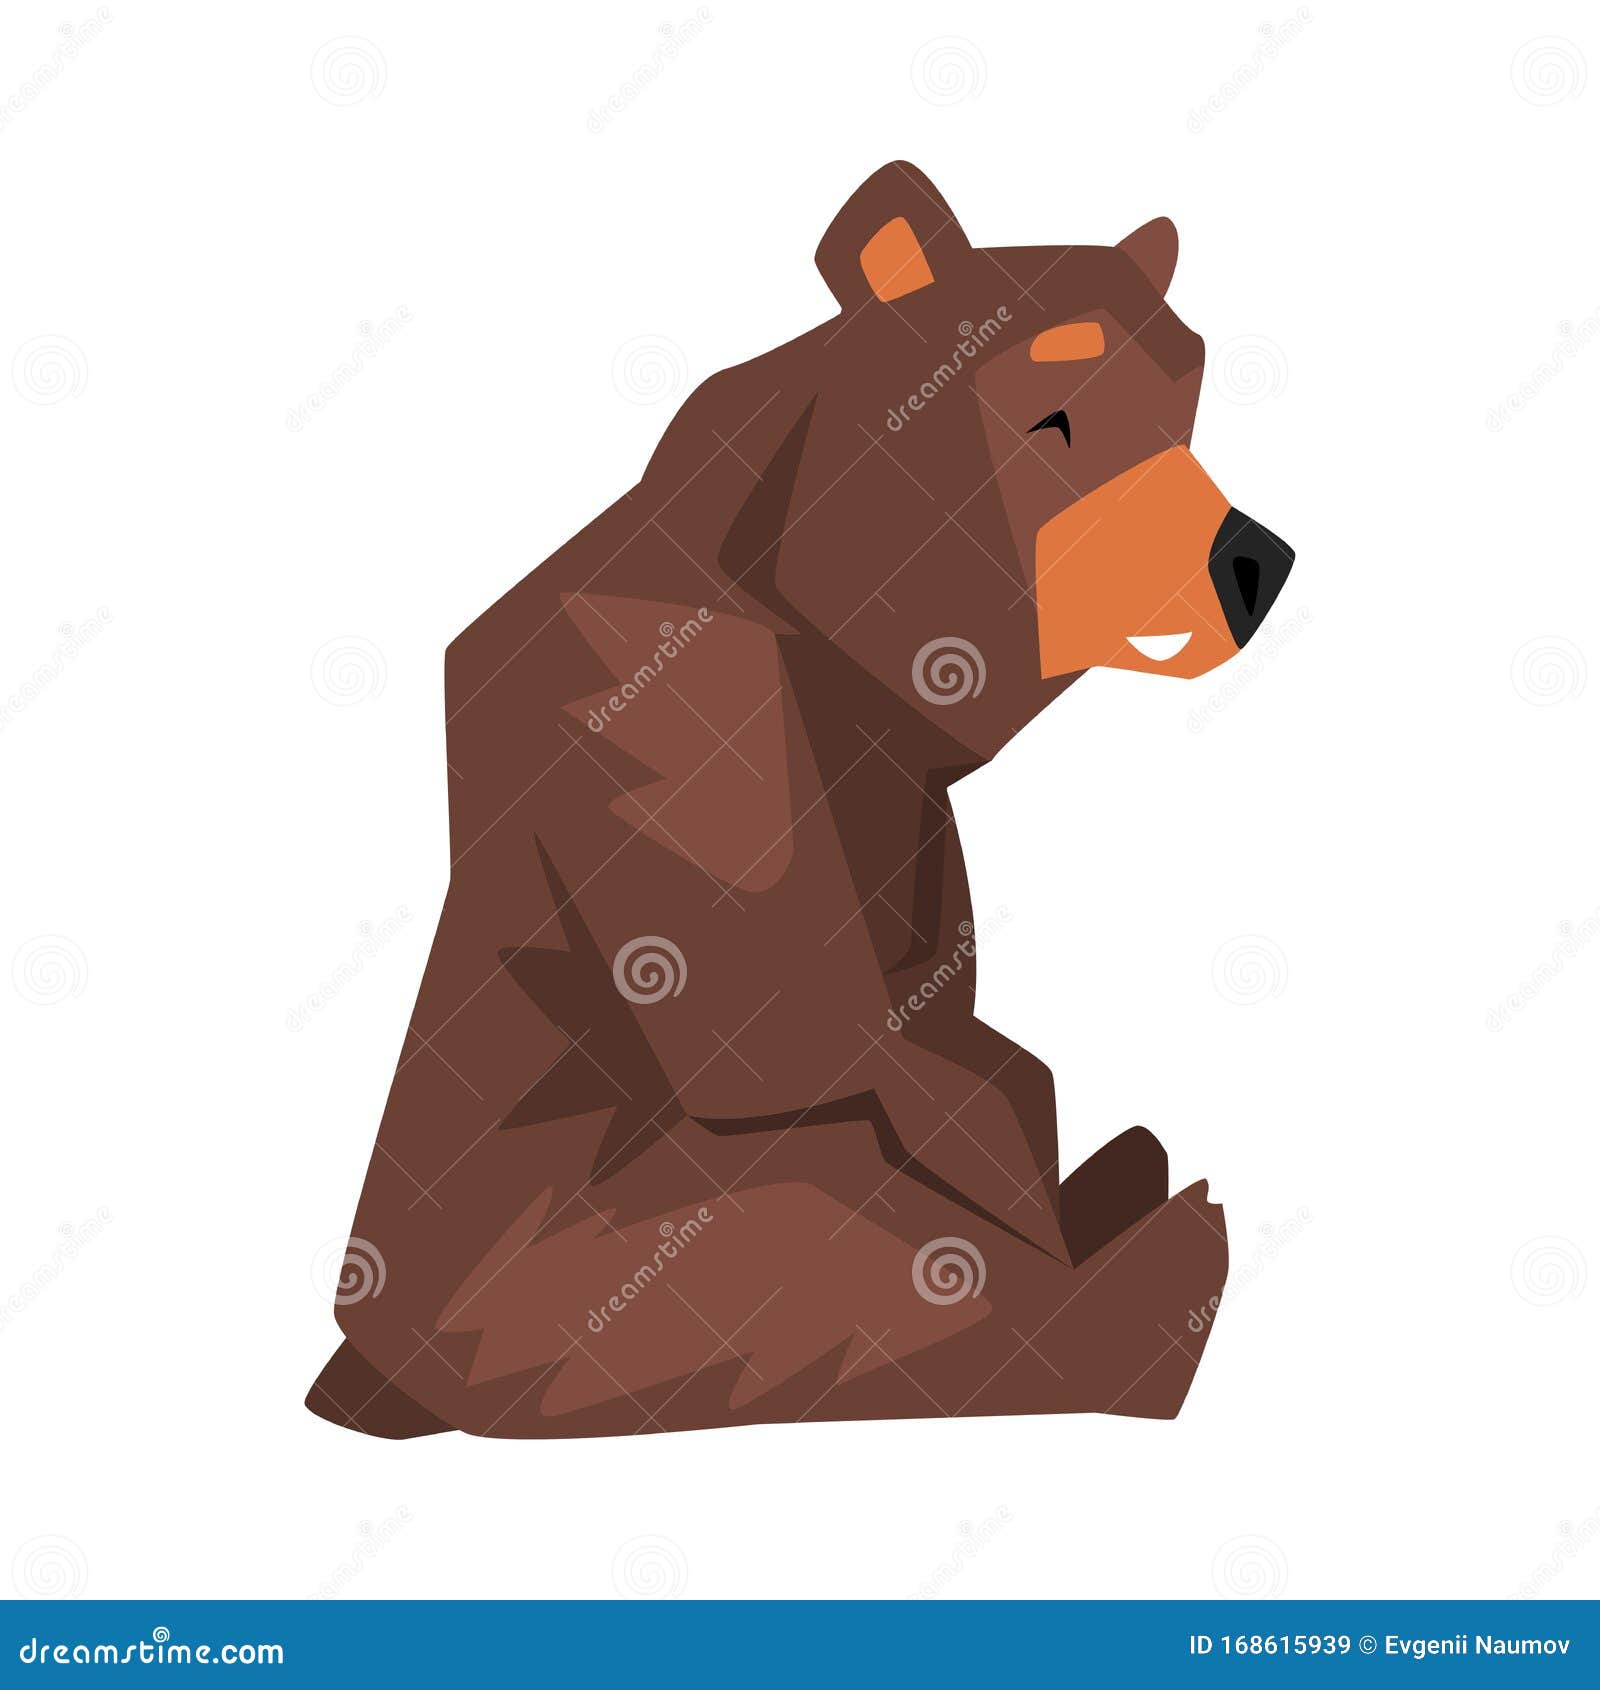 Sitting Brown Grizzly Bear, Wild Animal Character, Side View Cartoon Vector  Illustration Stock Vector - Illustration of beast, cartoon: 168615939